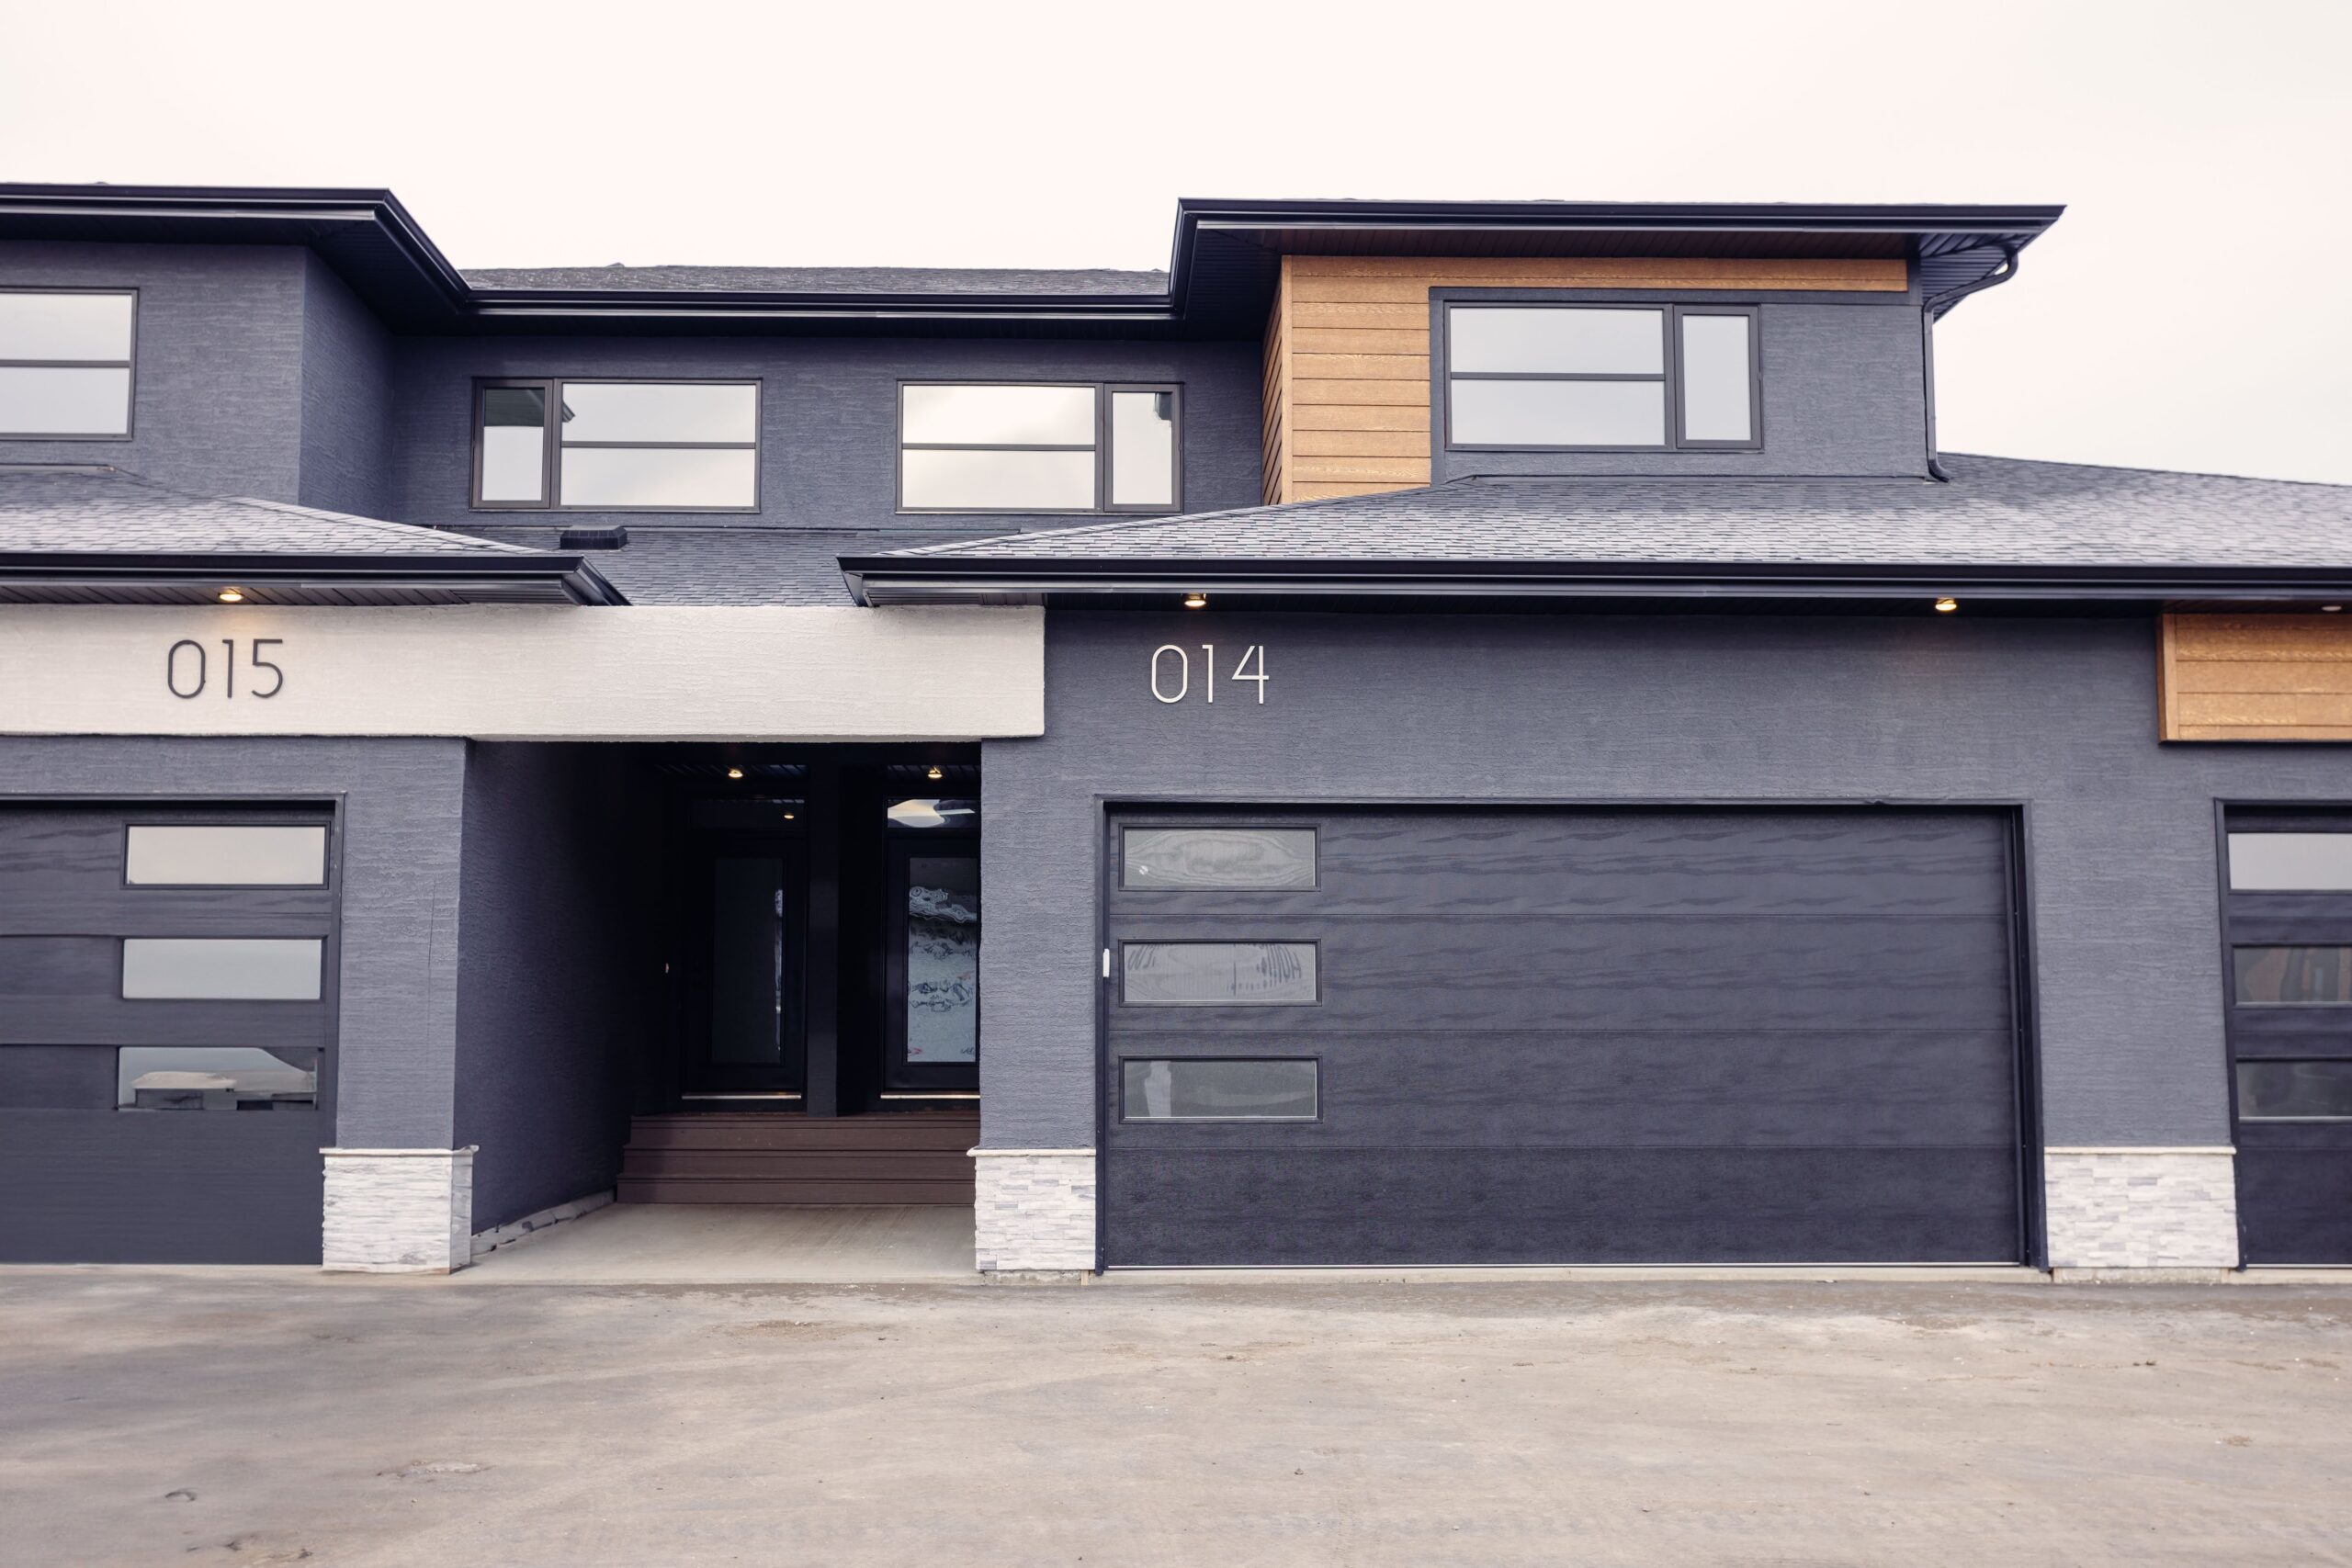 A grey and black house with garage doors.